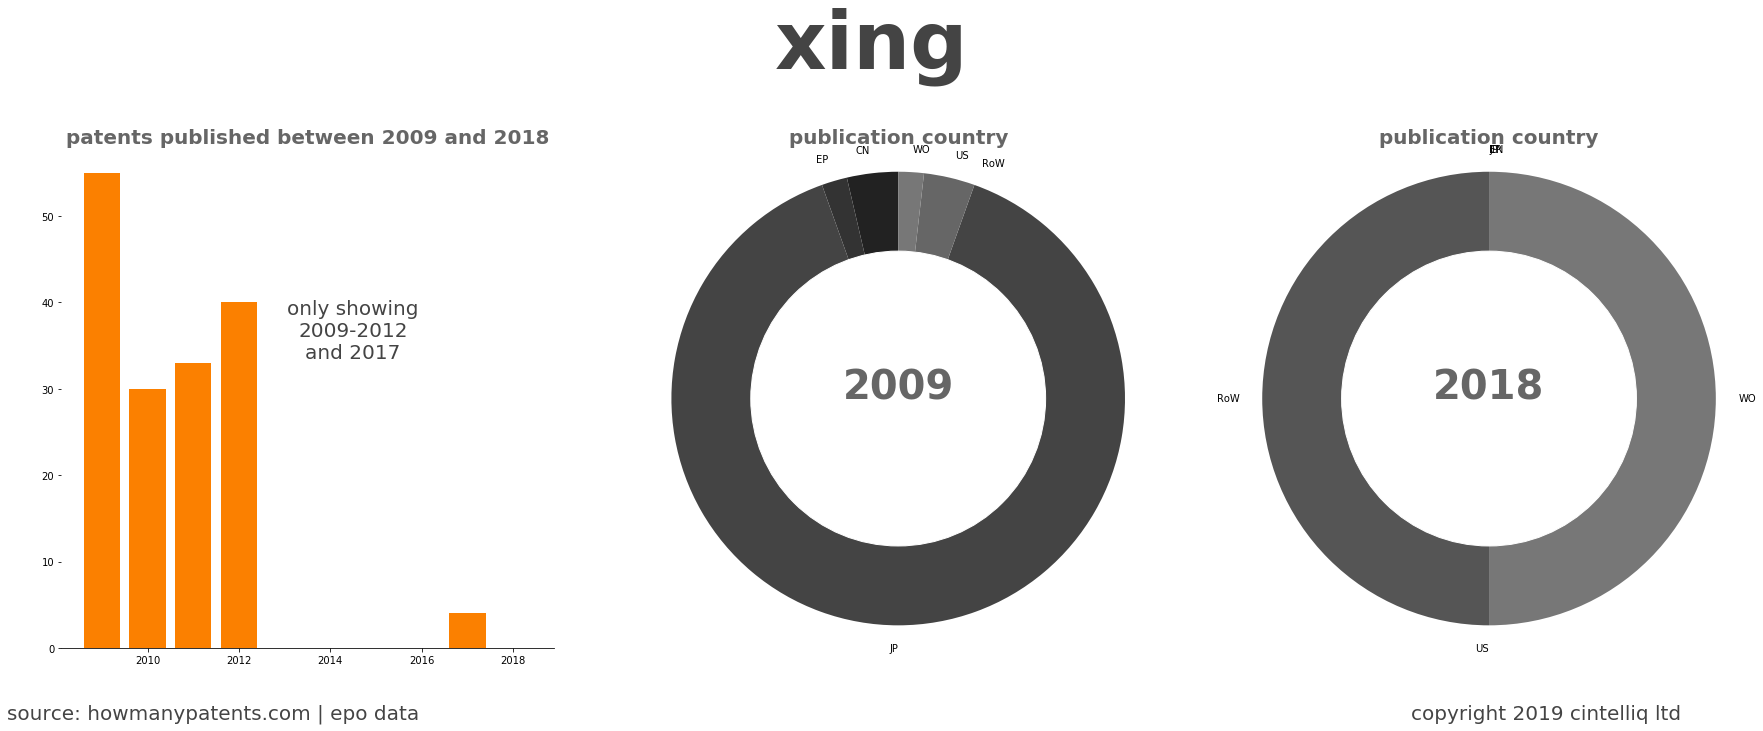 summary of patents for Xing